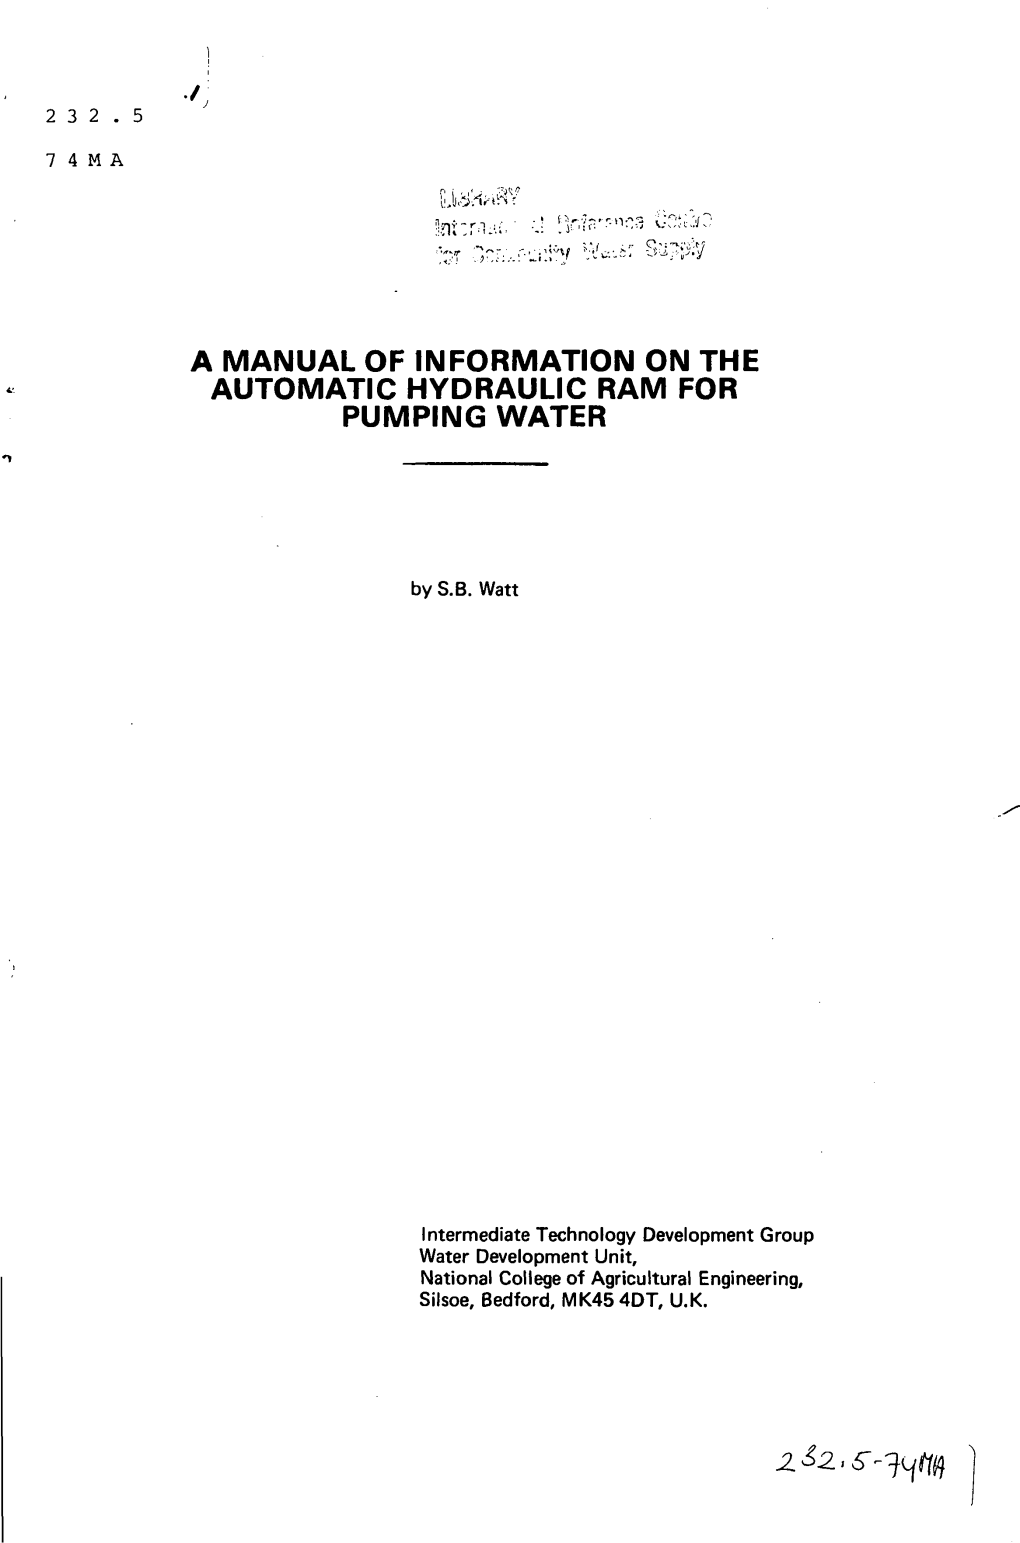 A Manual of Information on the Automatic Hydraulic Ram for Pumping Water